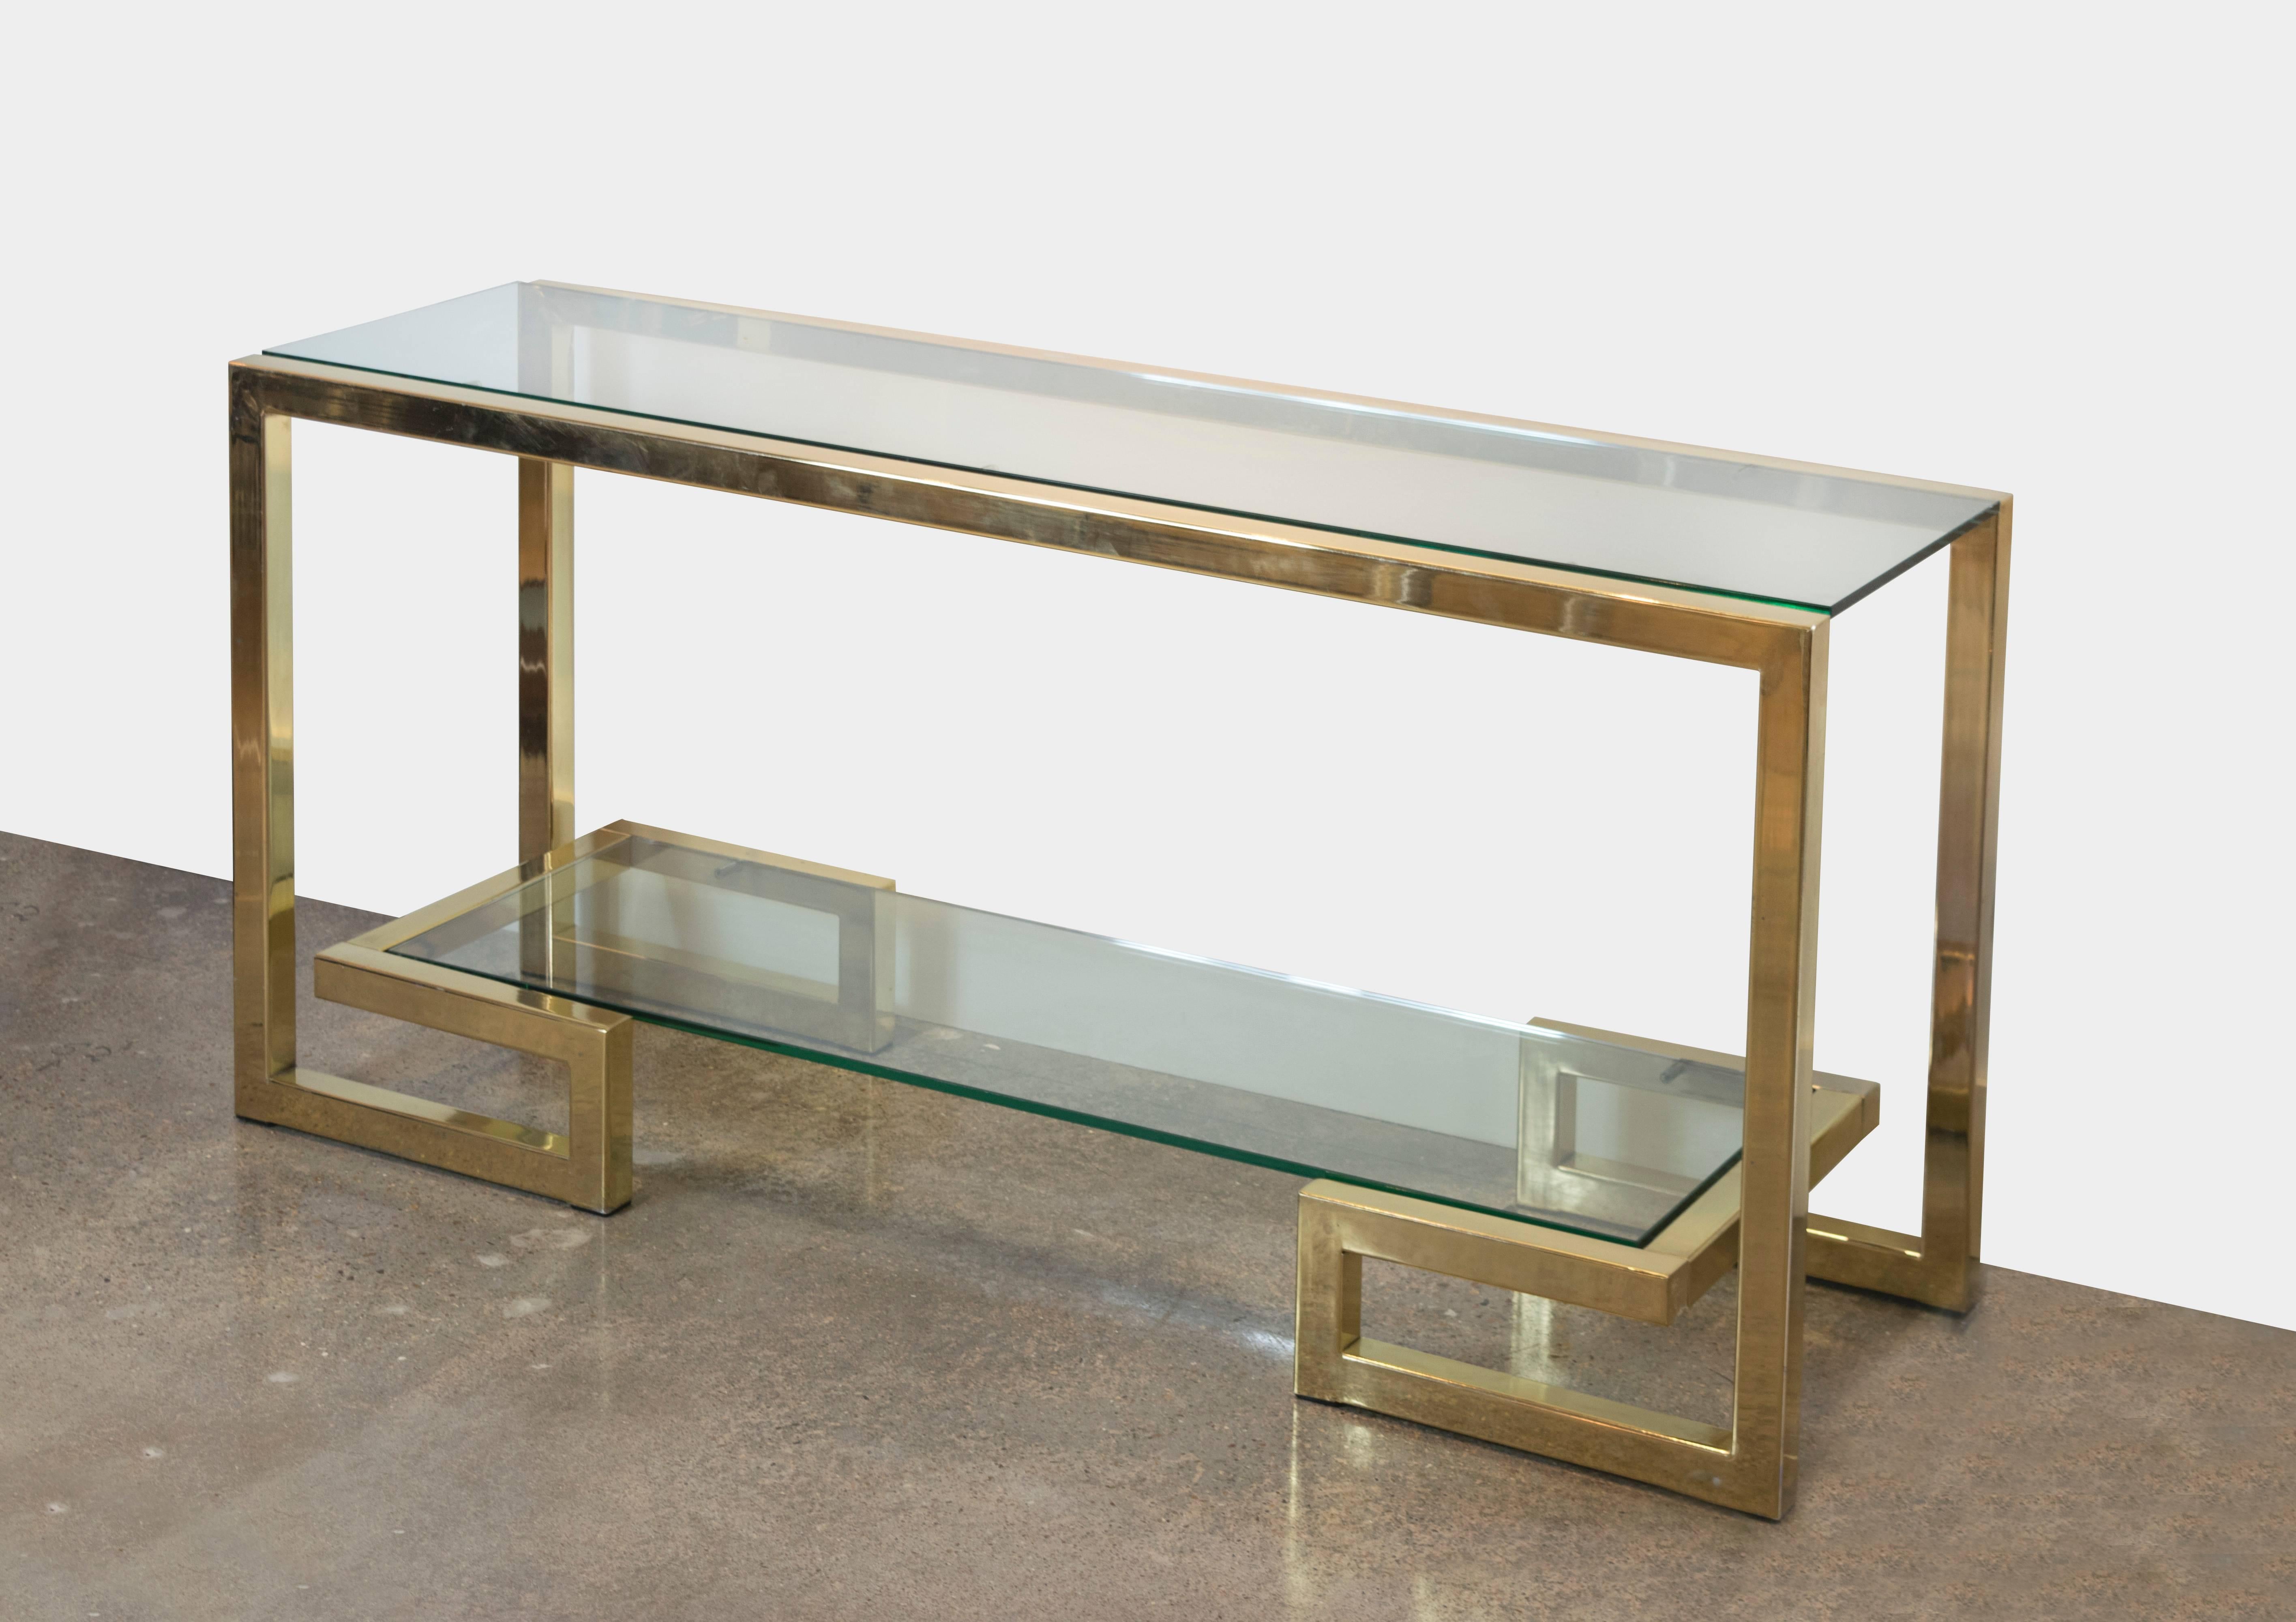 Glamorous yet architecturally straightforward, this console table has two floating shelves, and the bottom shelf sits on a Greek key base. This is a perfect table to go on a hall wall or in front of a sofa as the front facing is flawless.